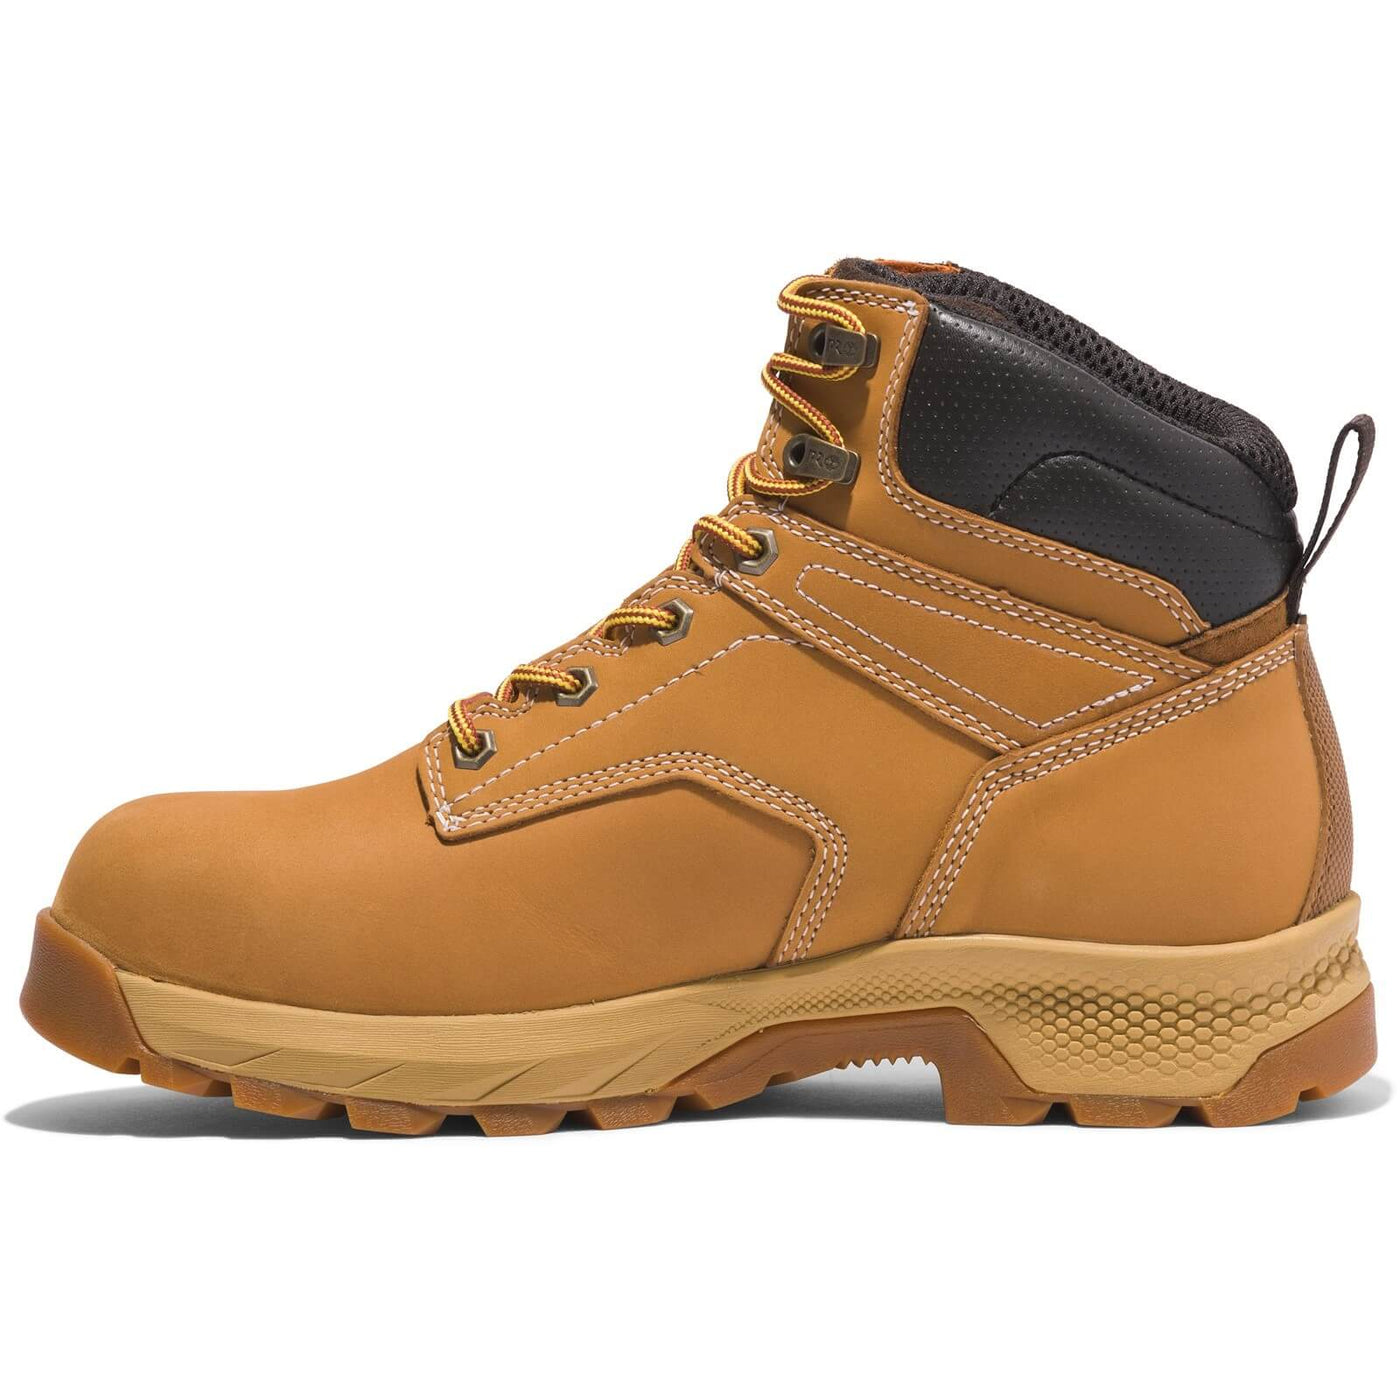 Timberland Pro Titan 6 Inch Lightweight Waterproof S3 Safety Boots Wheat Light Brown 6#colour_wheat-light-brown